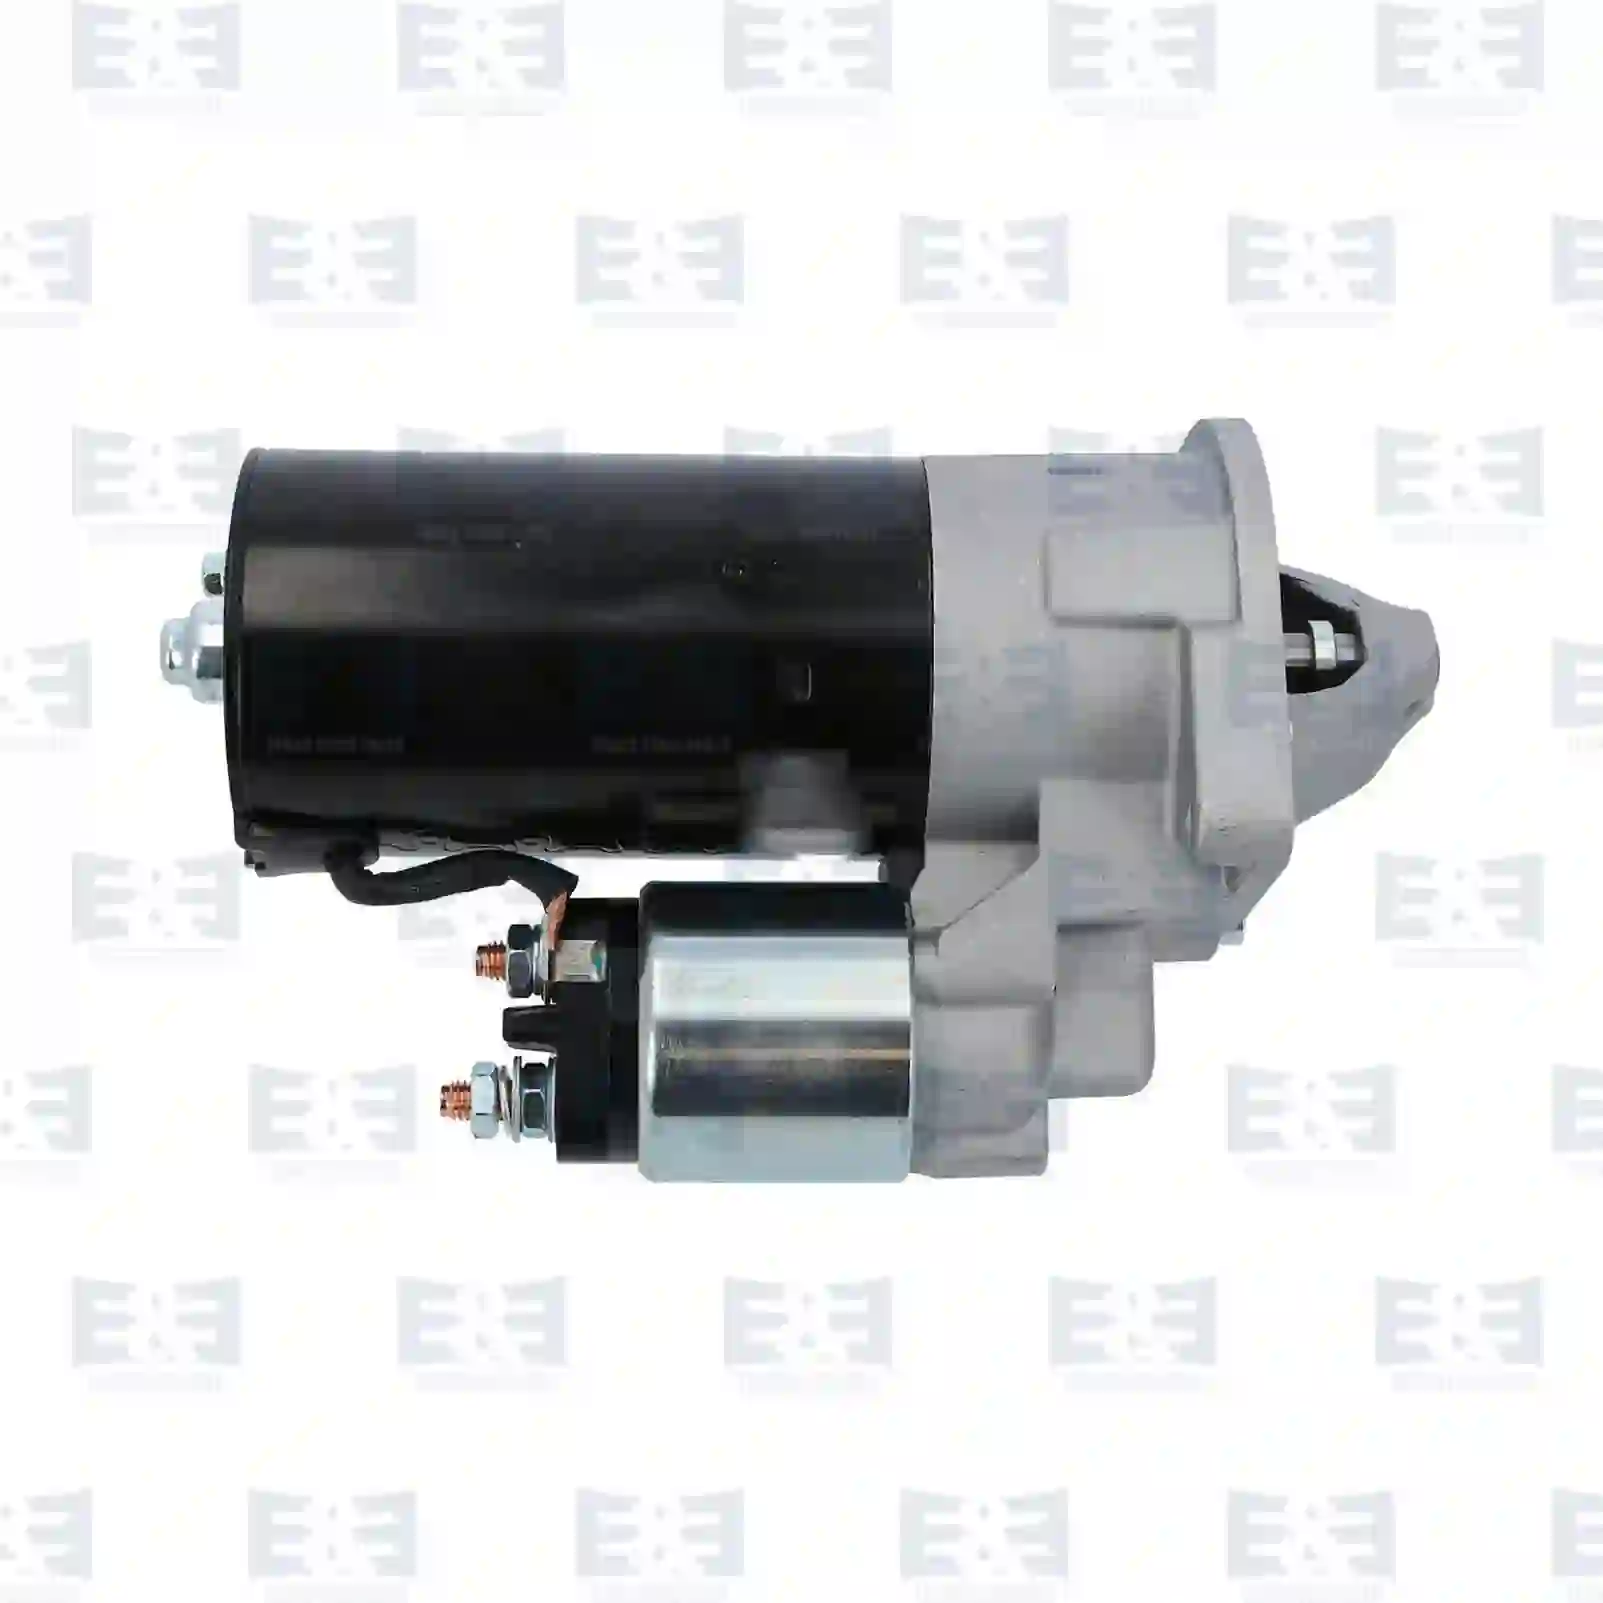 Starter Motor Starter, EE No 2E2290900 ,  oem no:5802AQ, 1524014, 1524014R, 1347058080, 71789529, 134705880, 1347058080, 71789529, 551959670, 55195967, 5802AQ E&E Truck Spare Parts | Truck Spare Parts, Auotomotive Spare Parts